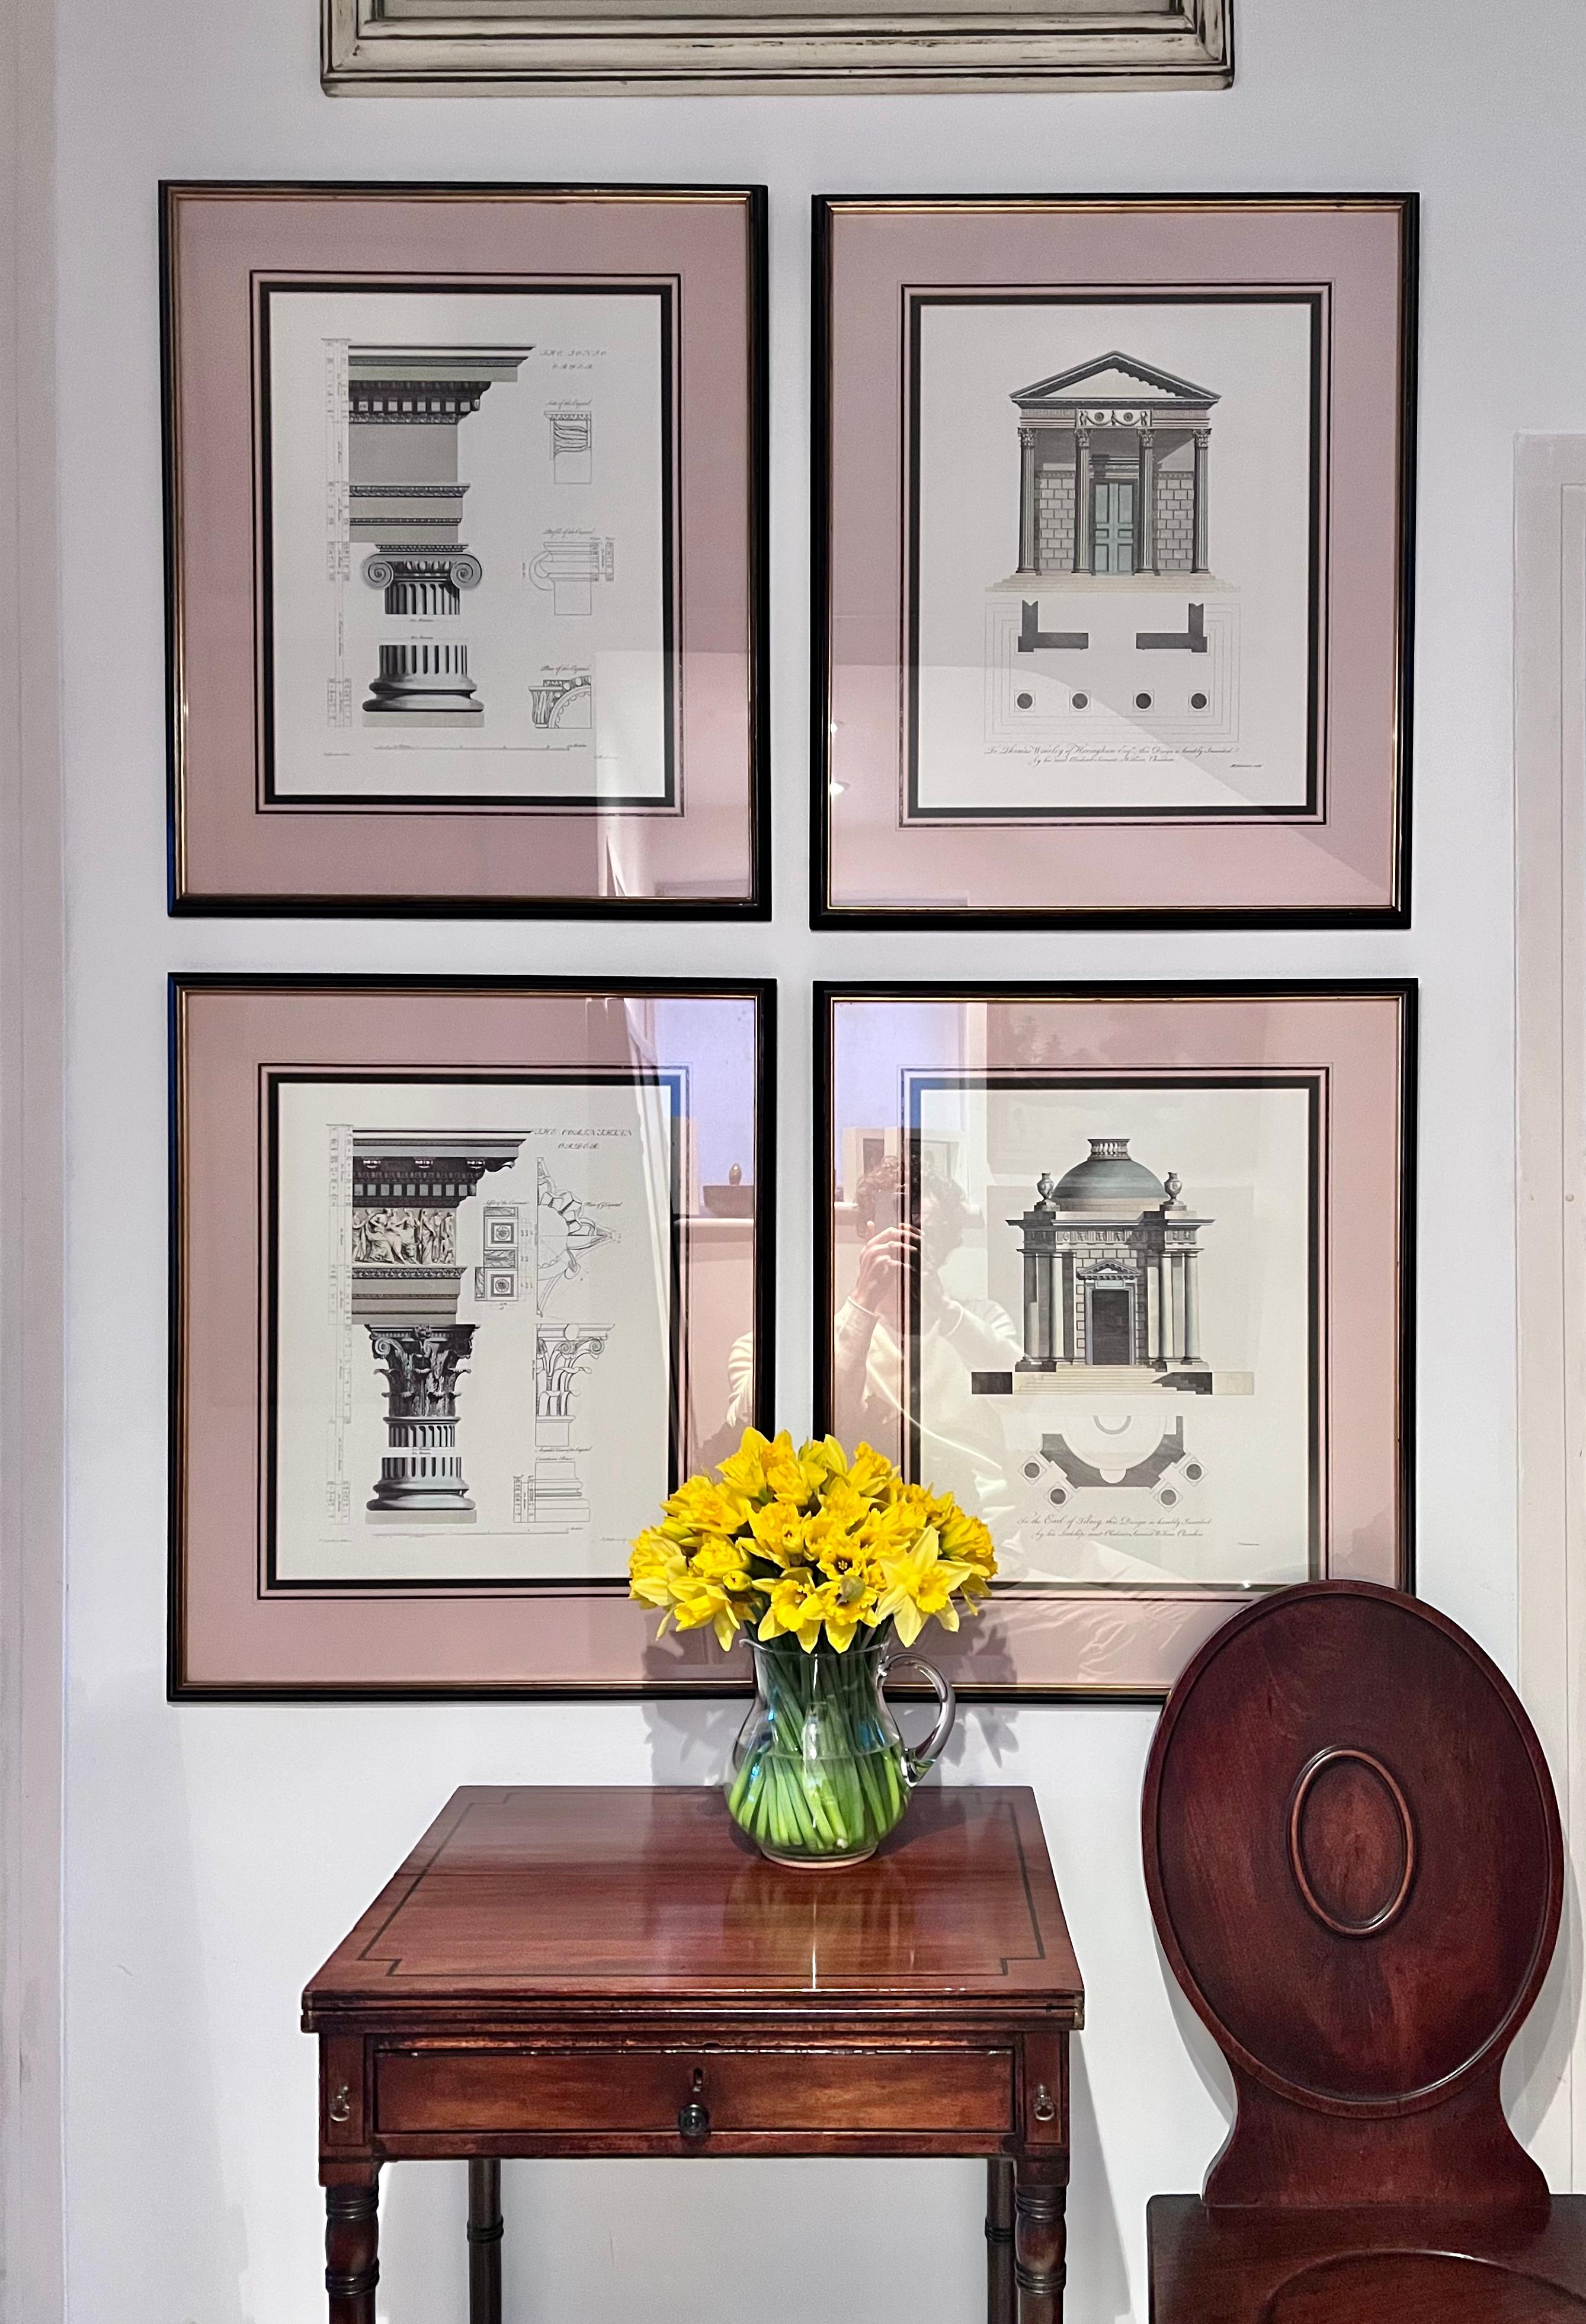 A set of four very decorative large prints of architectural orders,
20th century, after Sir William Chambers (1723-1796) from his Treatise on Civil Architecture published in 1759.

In modern glazed frames.

Dimensions:
Framed:
Width 22.25 in / 56.5